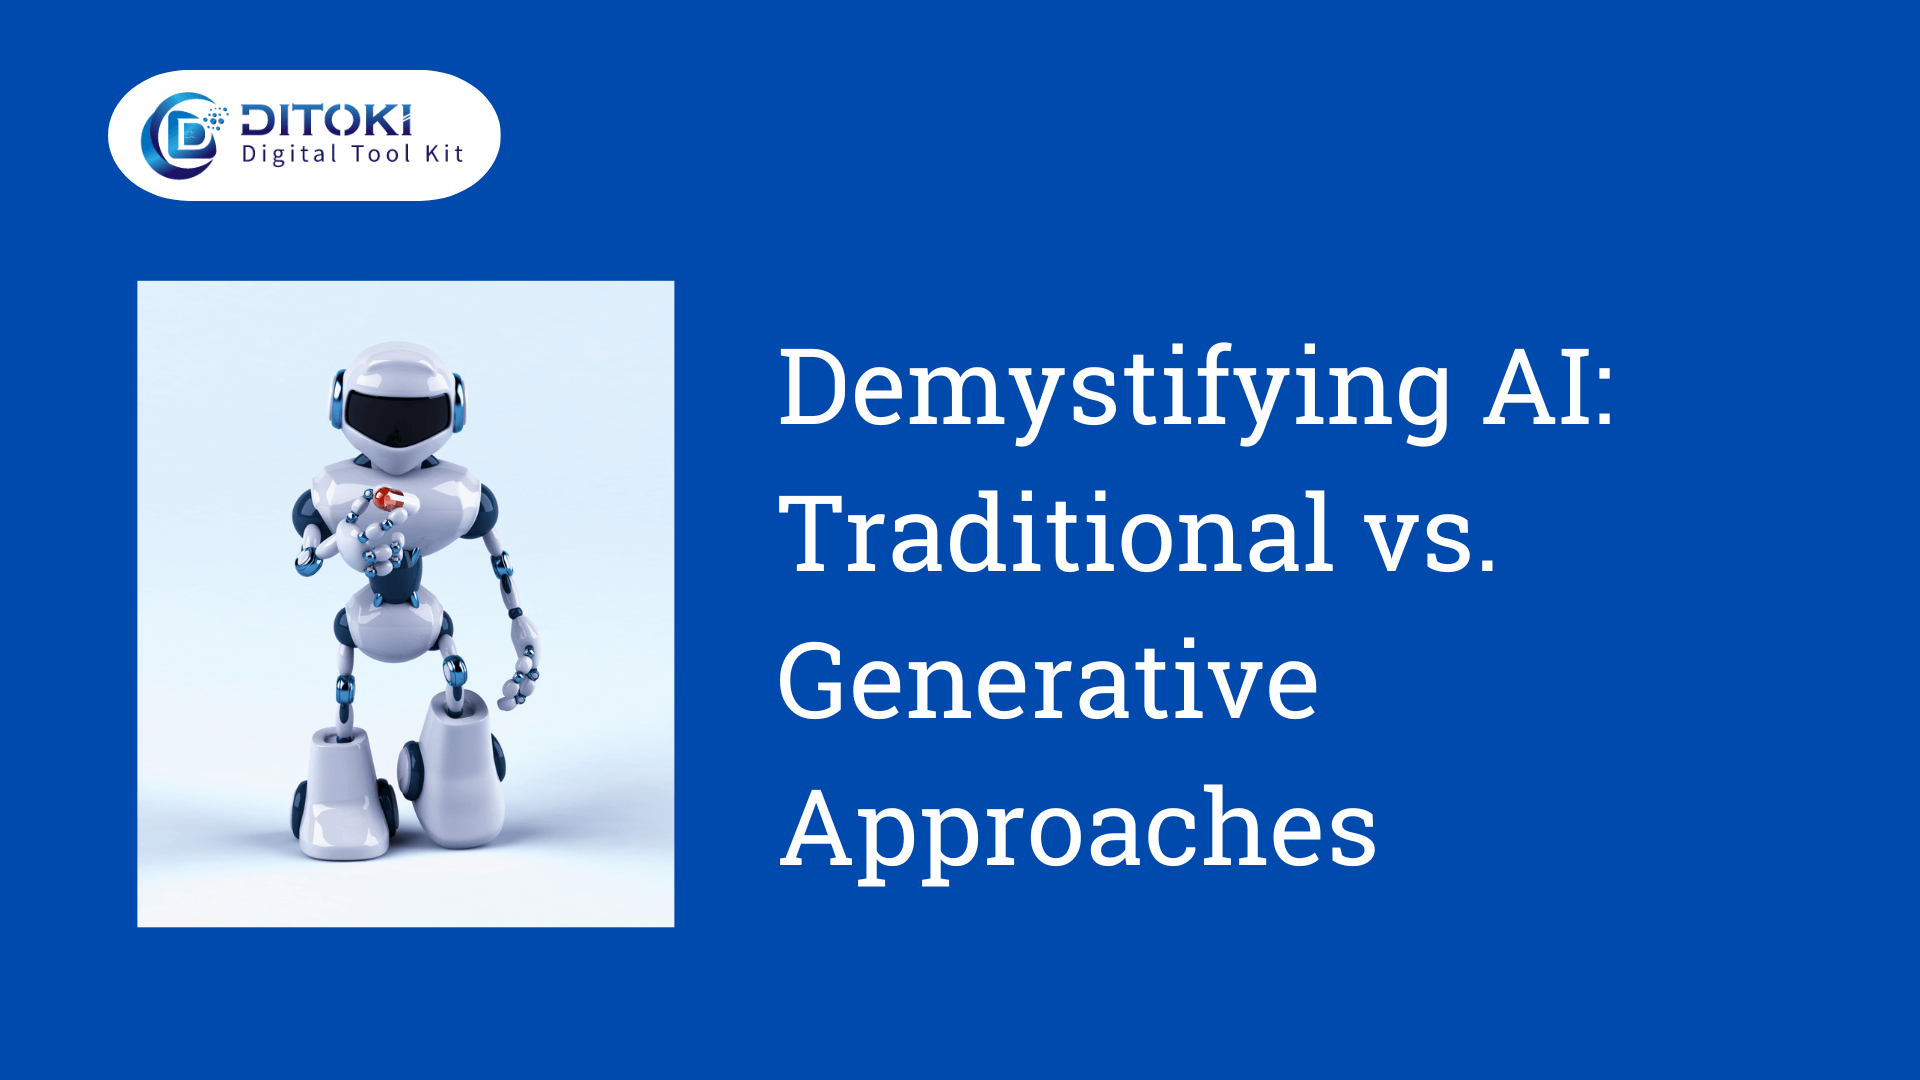 Demystifying AI: Traditional vs. Generative Approaches